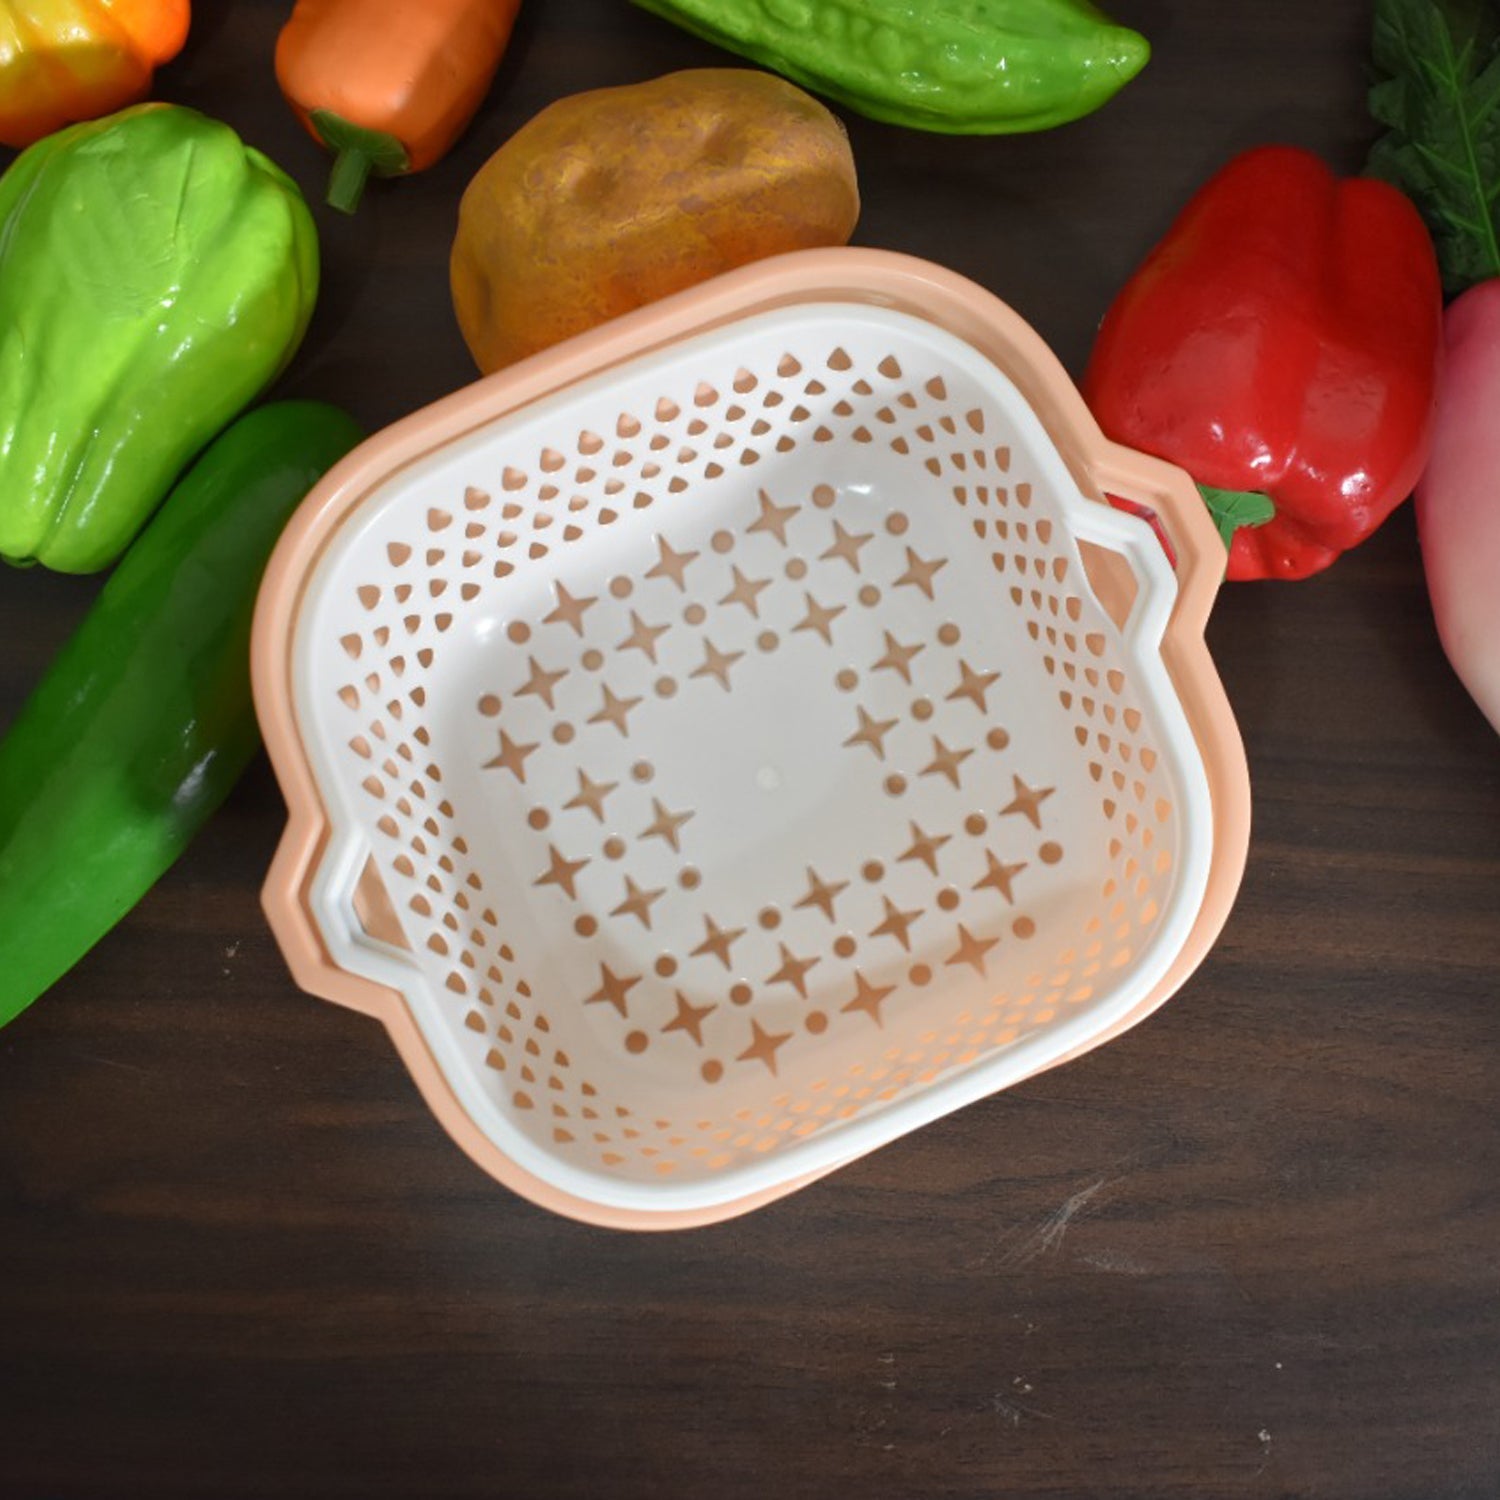 2785 2 In 1 Basket Strainer To Rinse Various Types Of Items Like Fruits, Vegetables Etc.